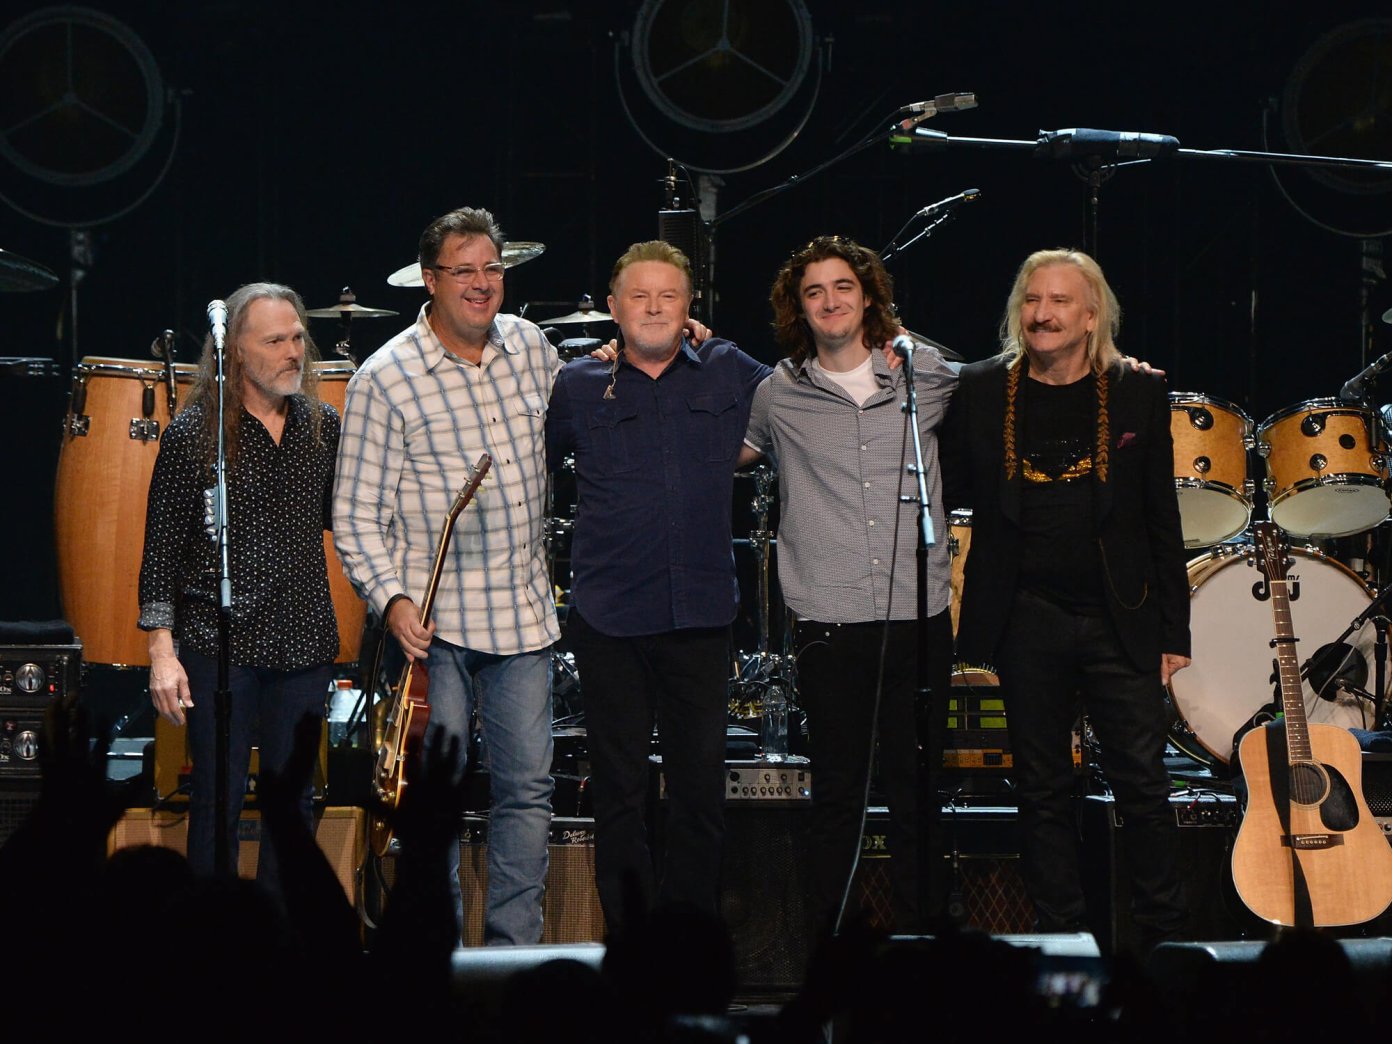 The Eagles announce farewell tour ft. Steely Dan “This is our swan song"